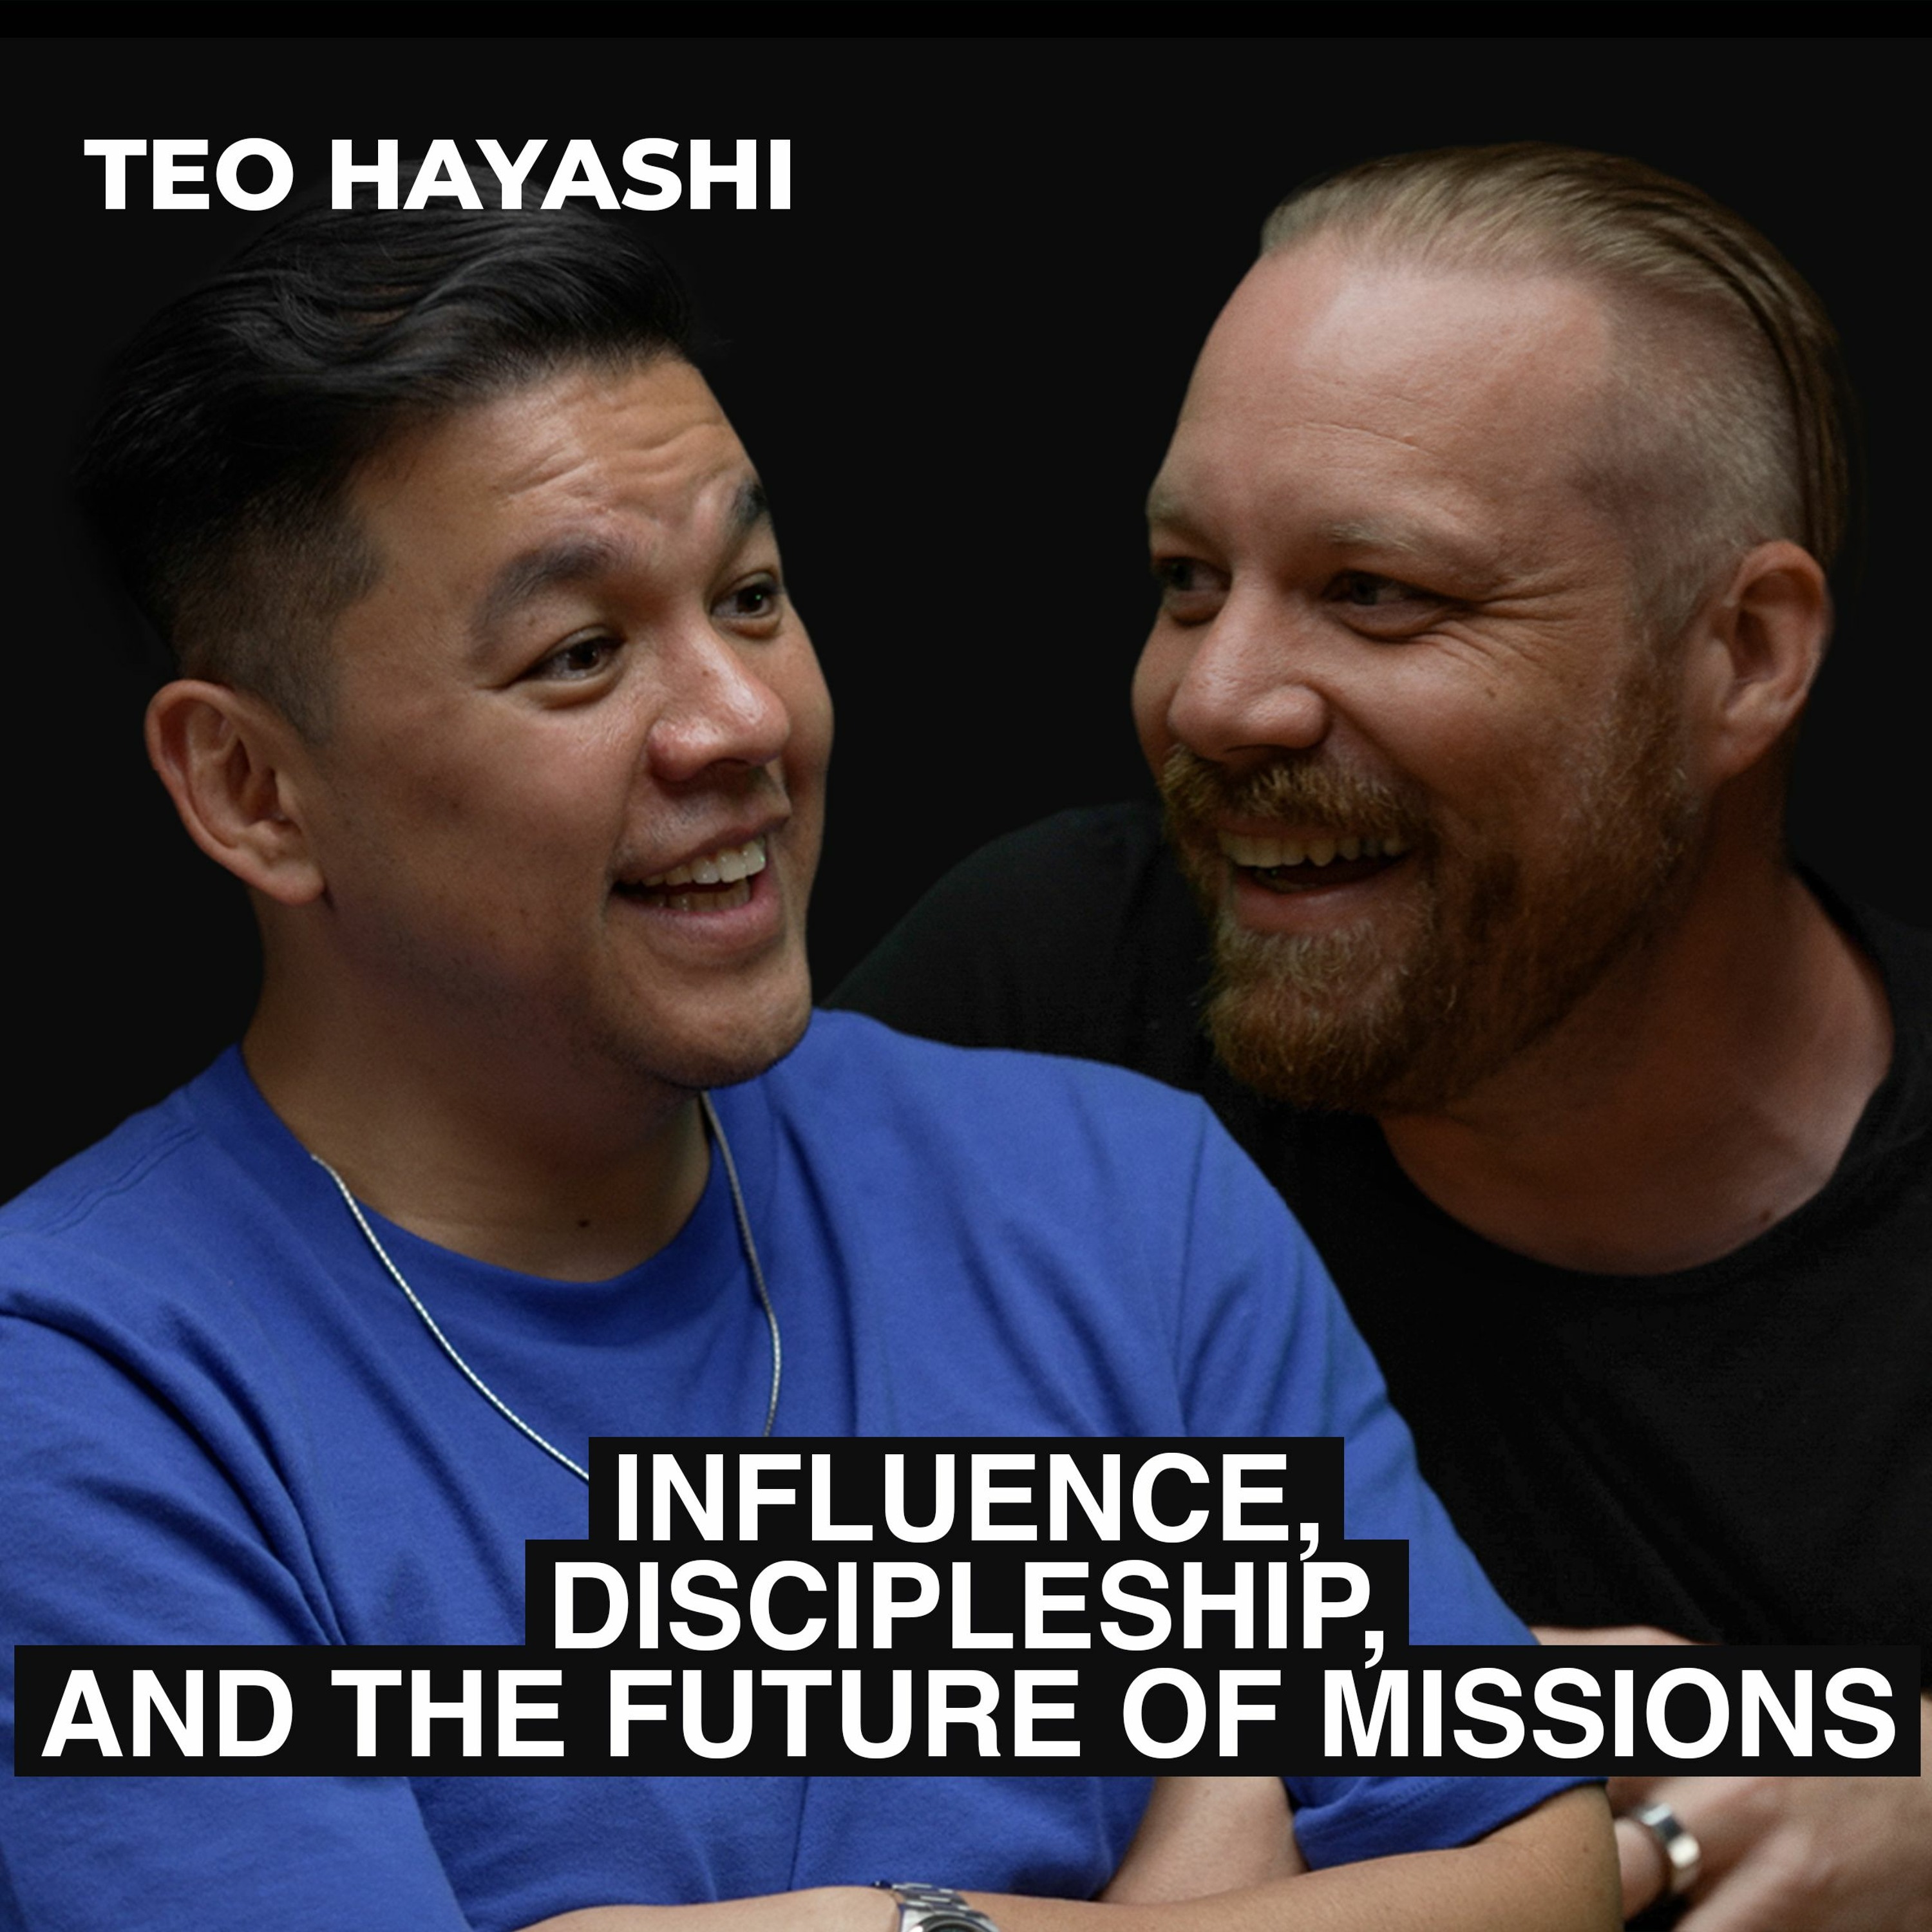 Teo Hayashi: Influence, Discipleship, and the Future of Missions